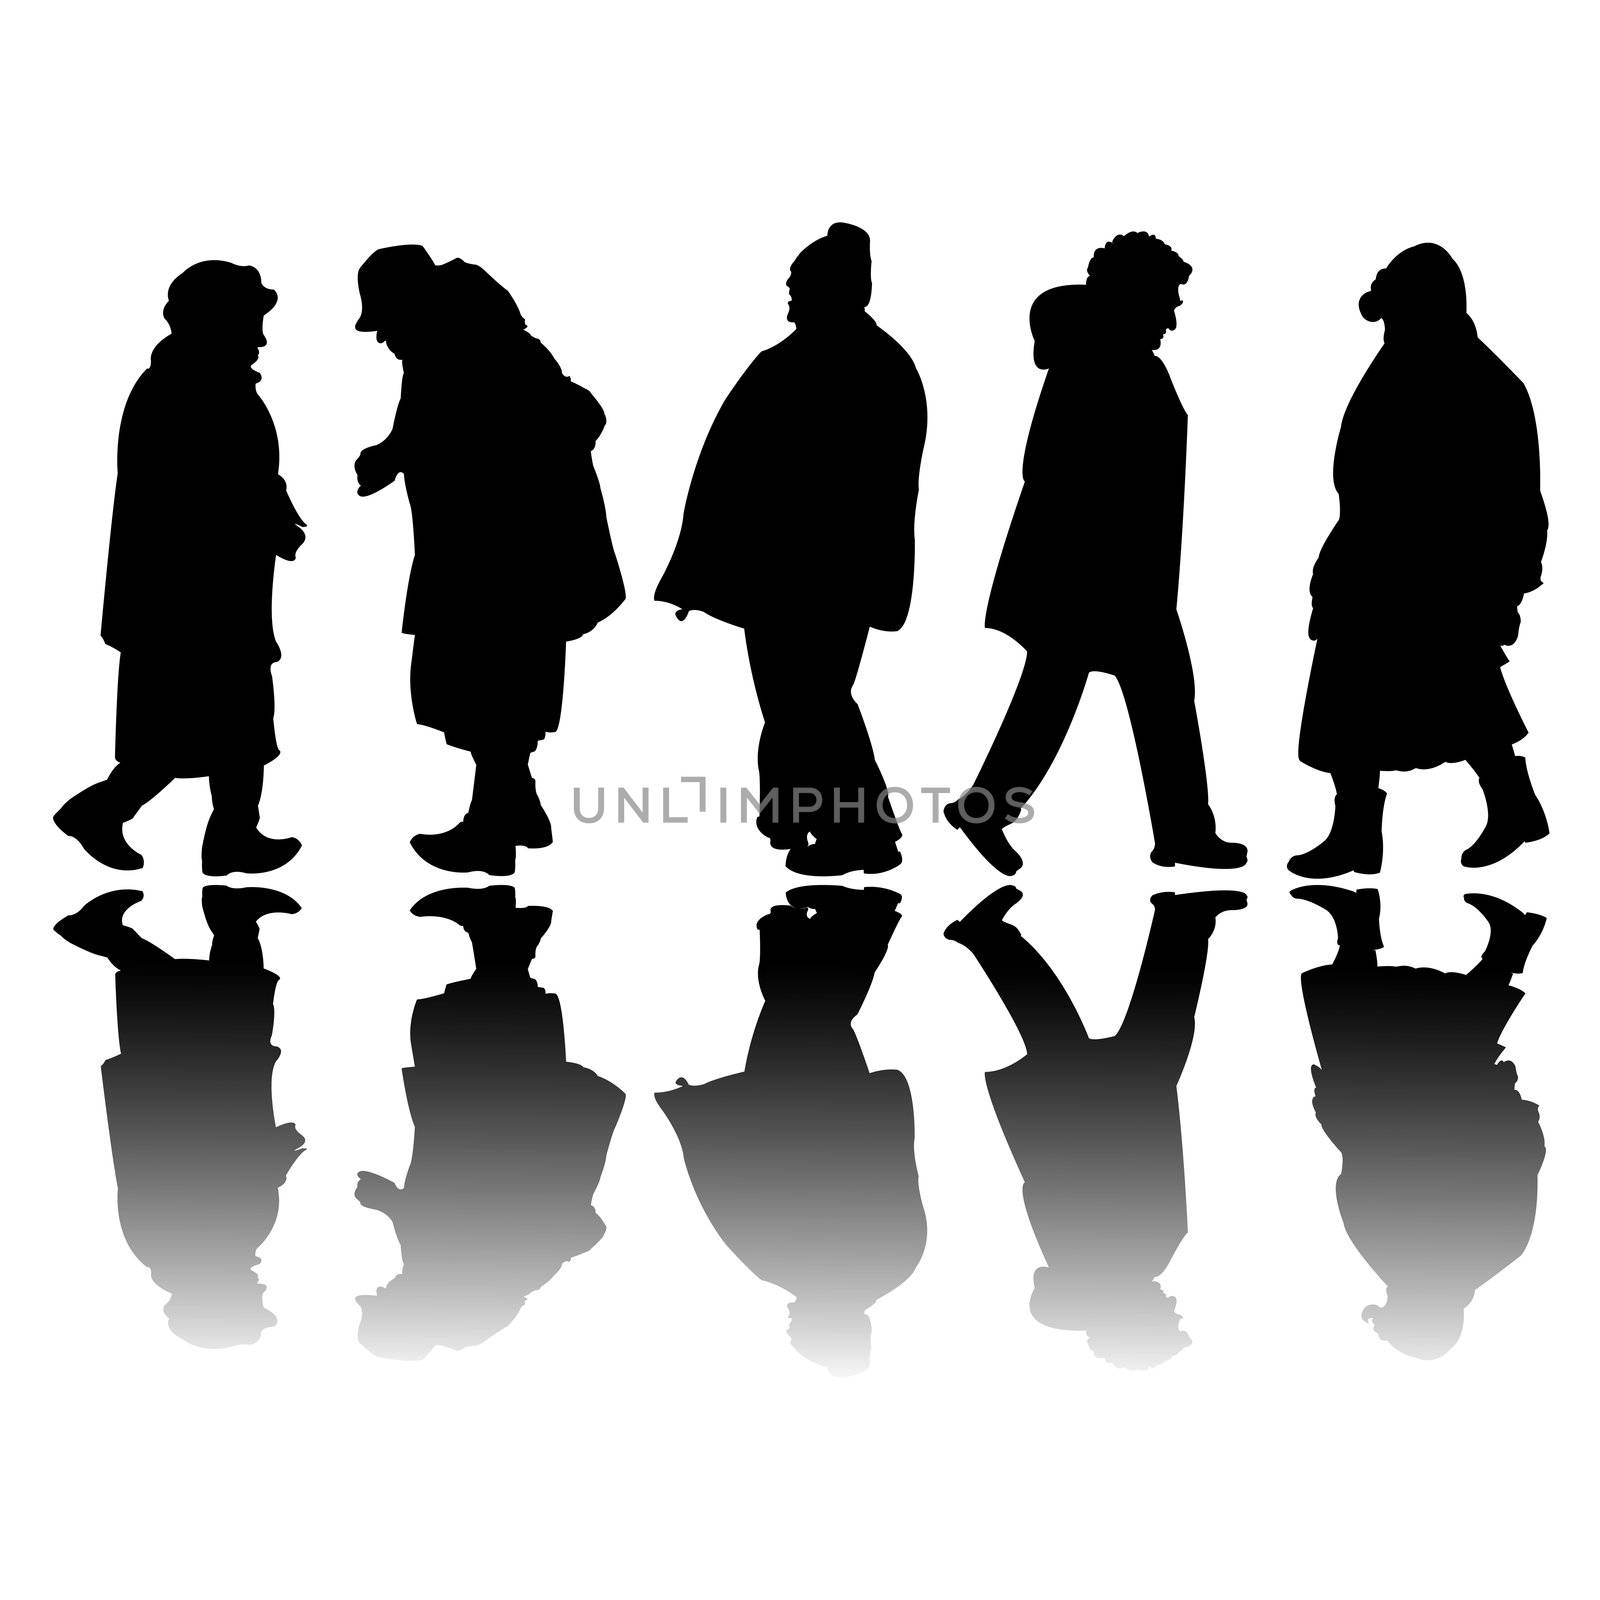 old people black silhouettes by robertosch